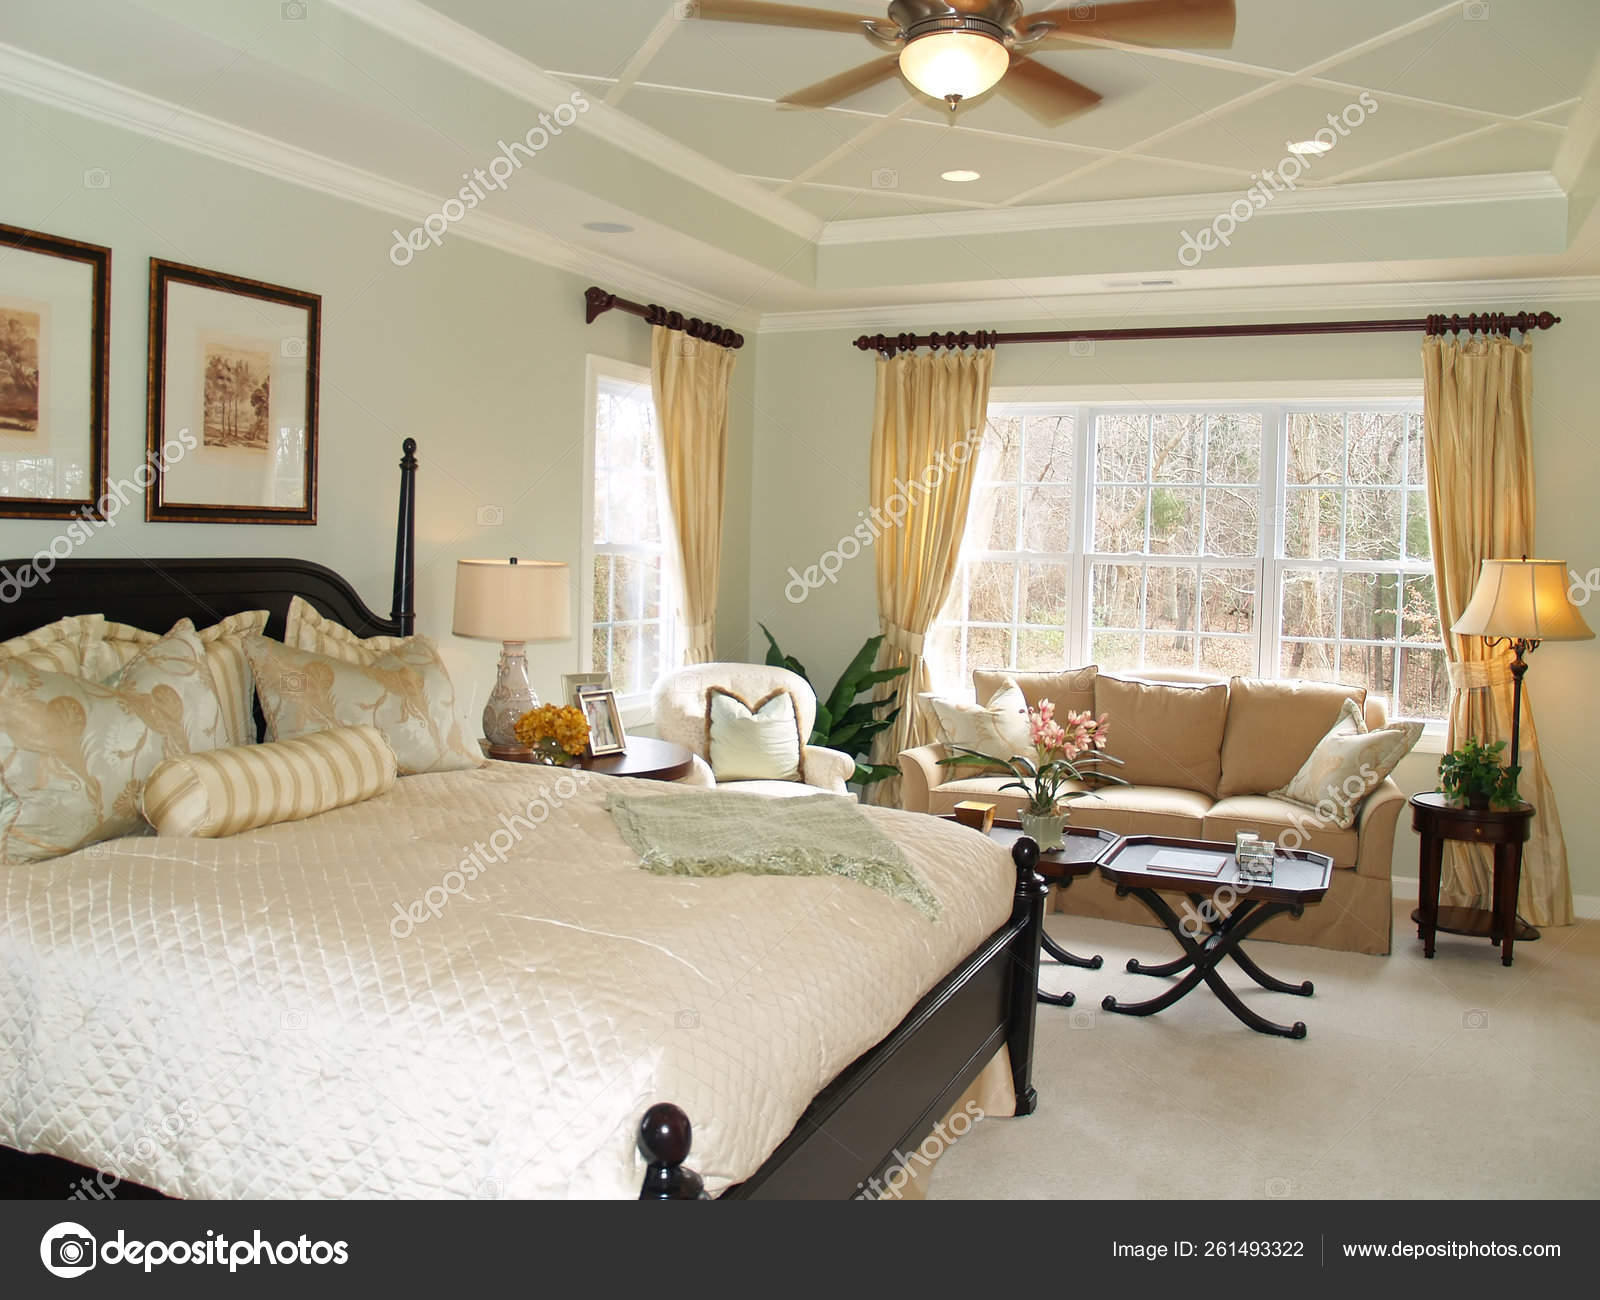 Luxury Master Bedroom Suite Upscale American Home Showing King